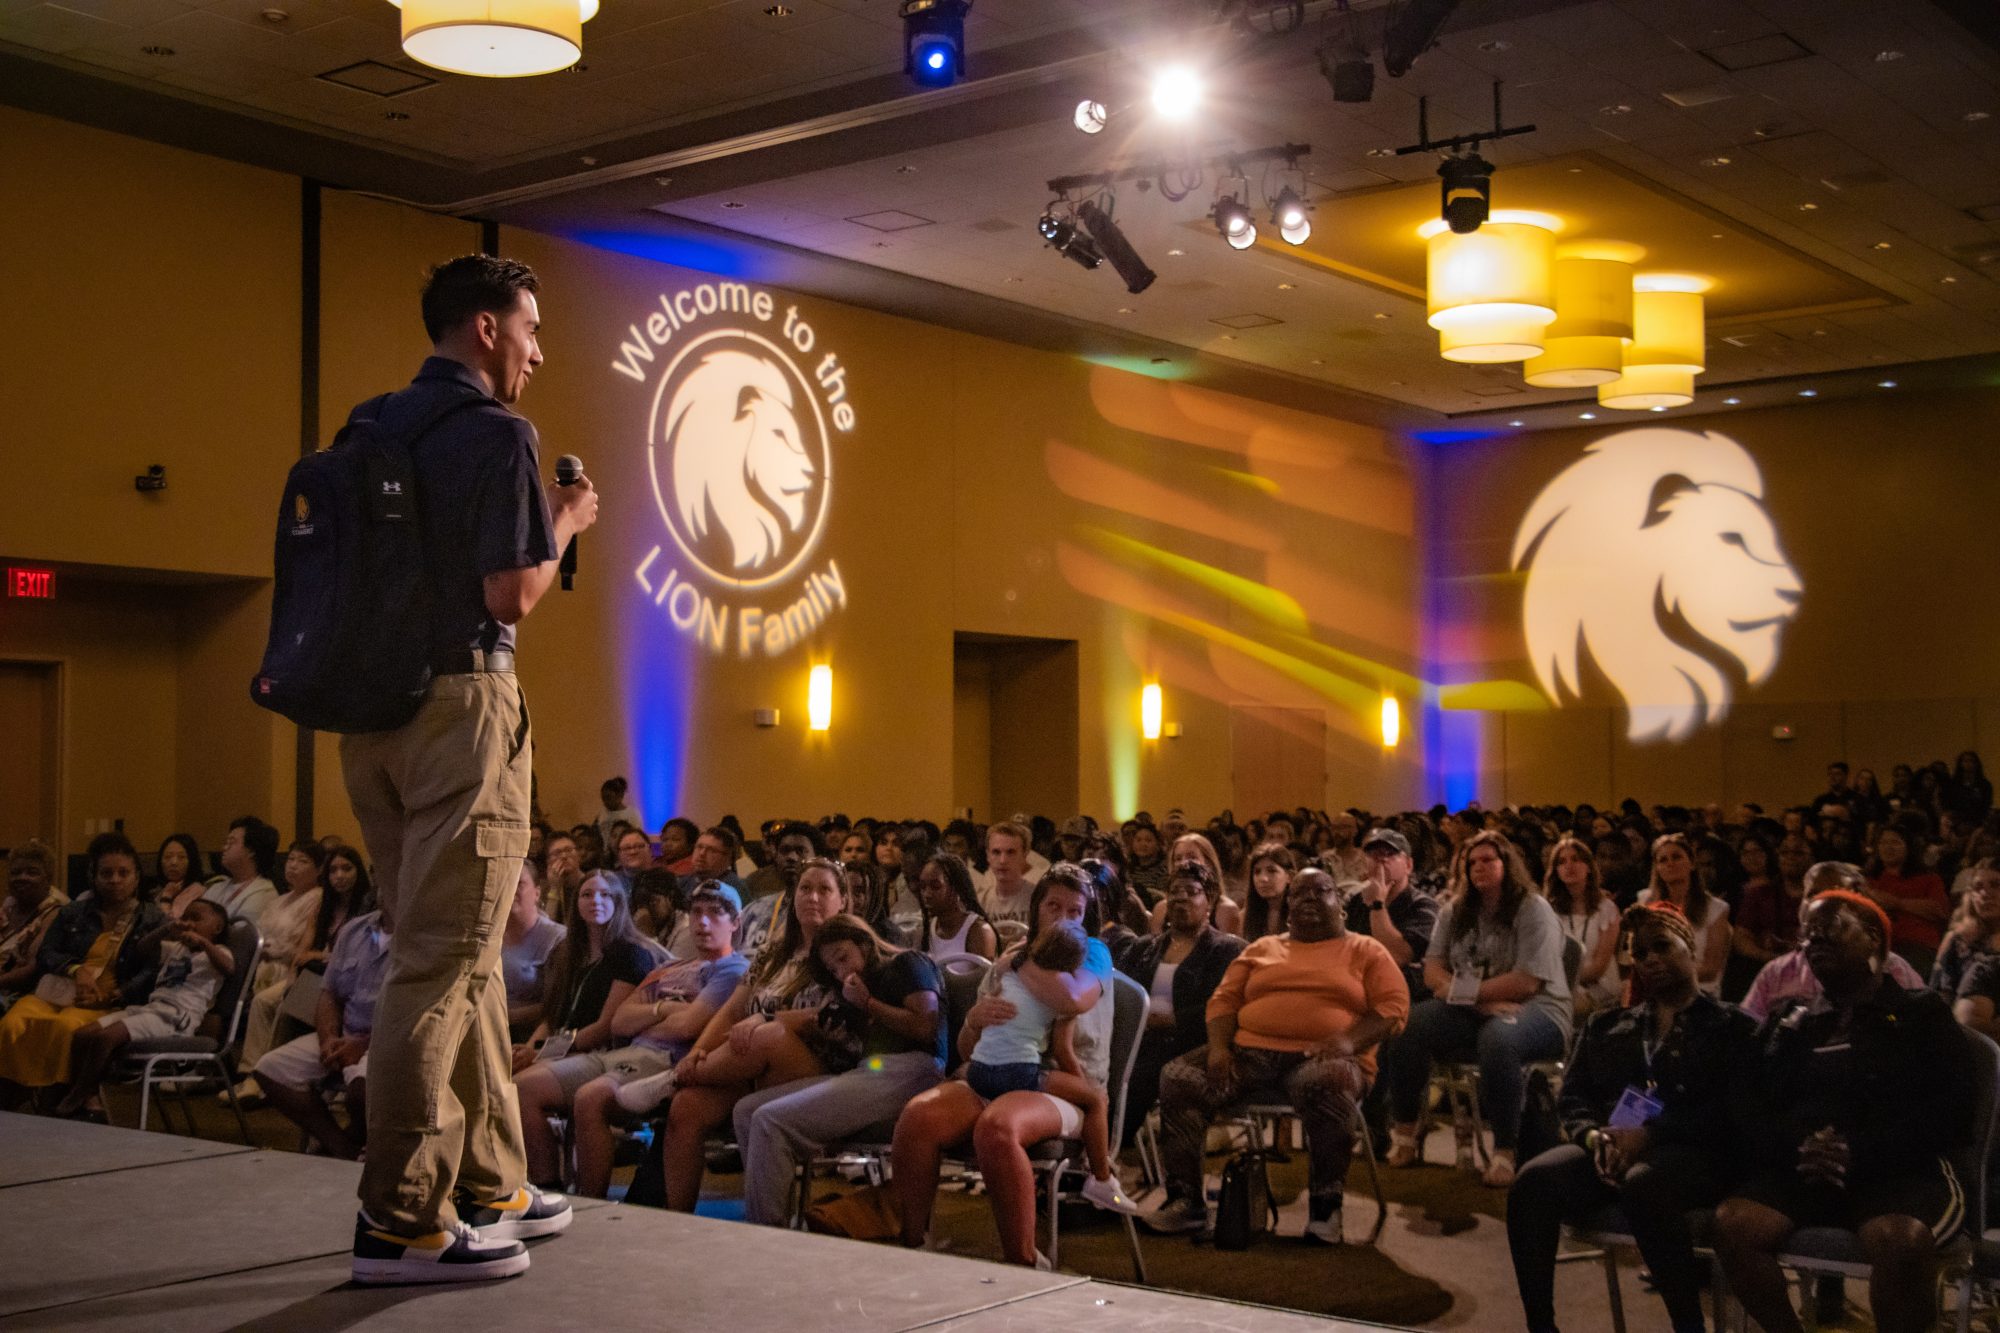 The class president leading the ROAR presentation from the stage with a large crowd in front of him. The TAMUC logo lit up in the background on the wall.